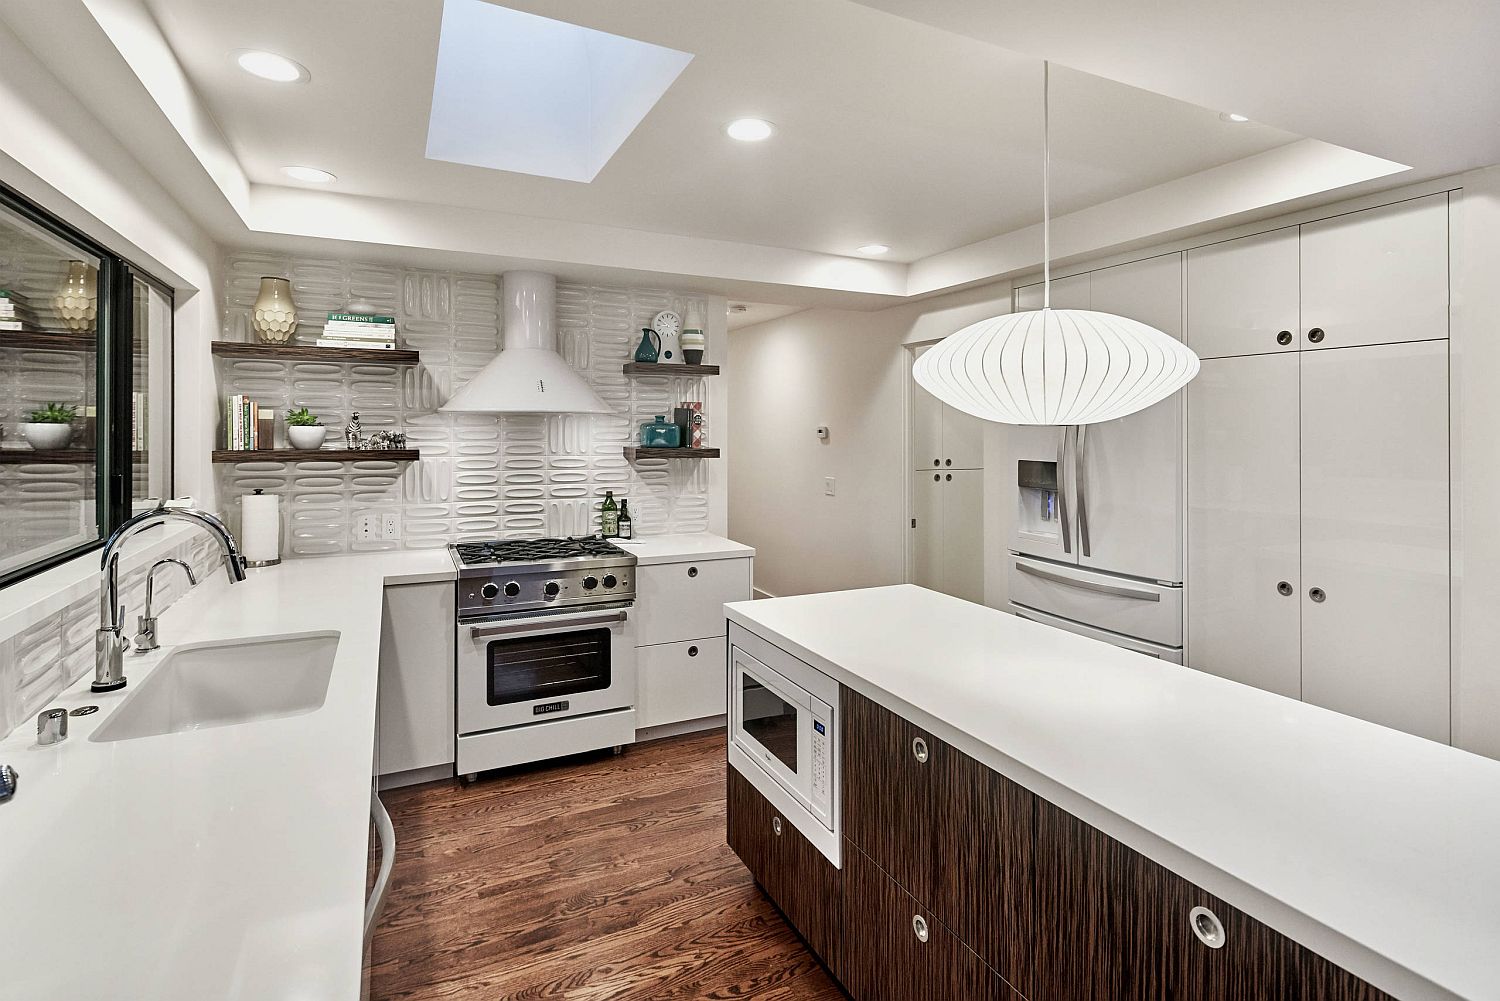 All-white kitchen with a 3d-tiled backsplash that adds pattern without altering the color scheme